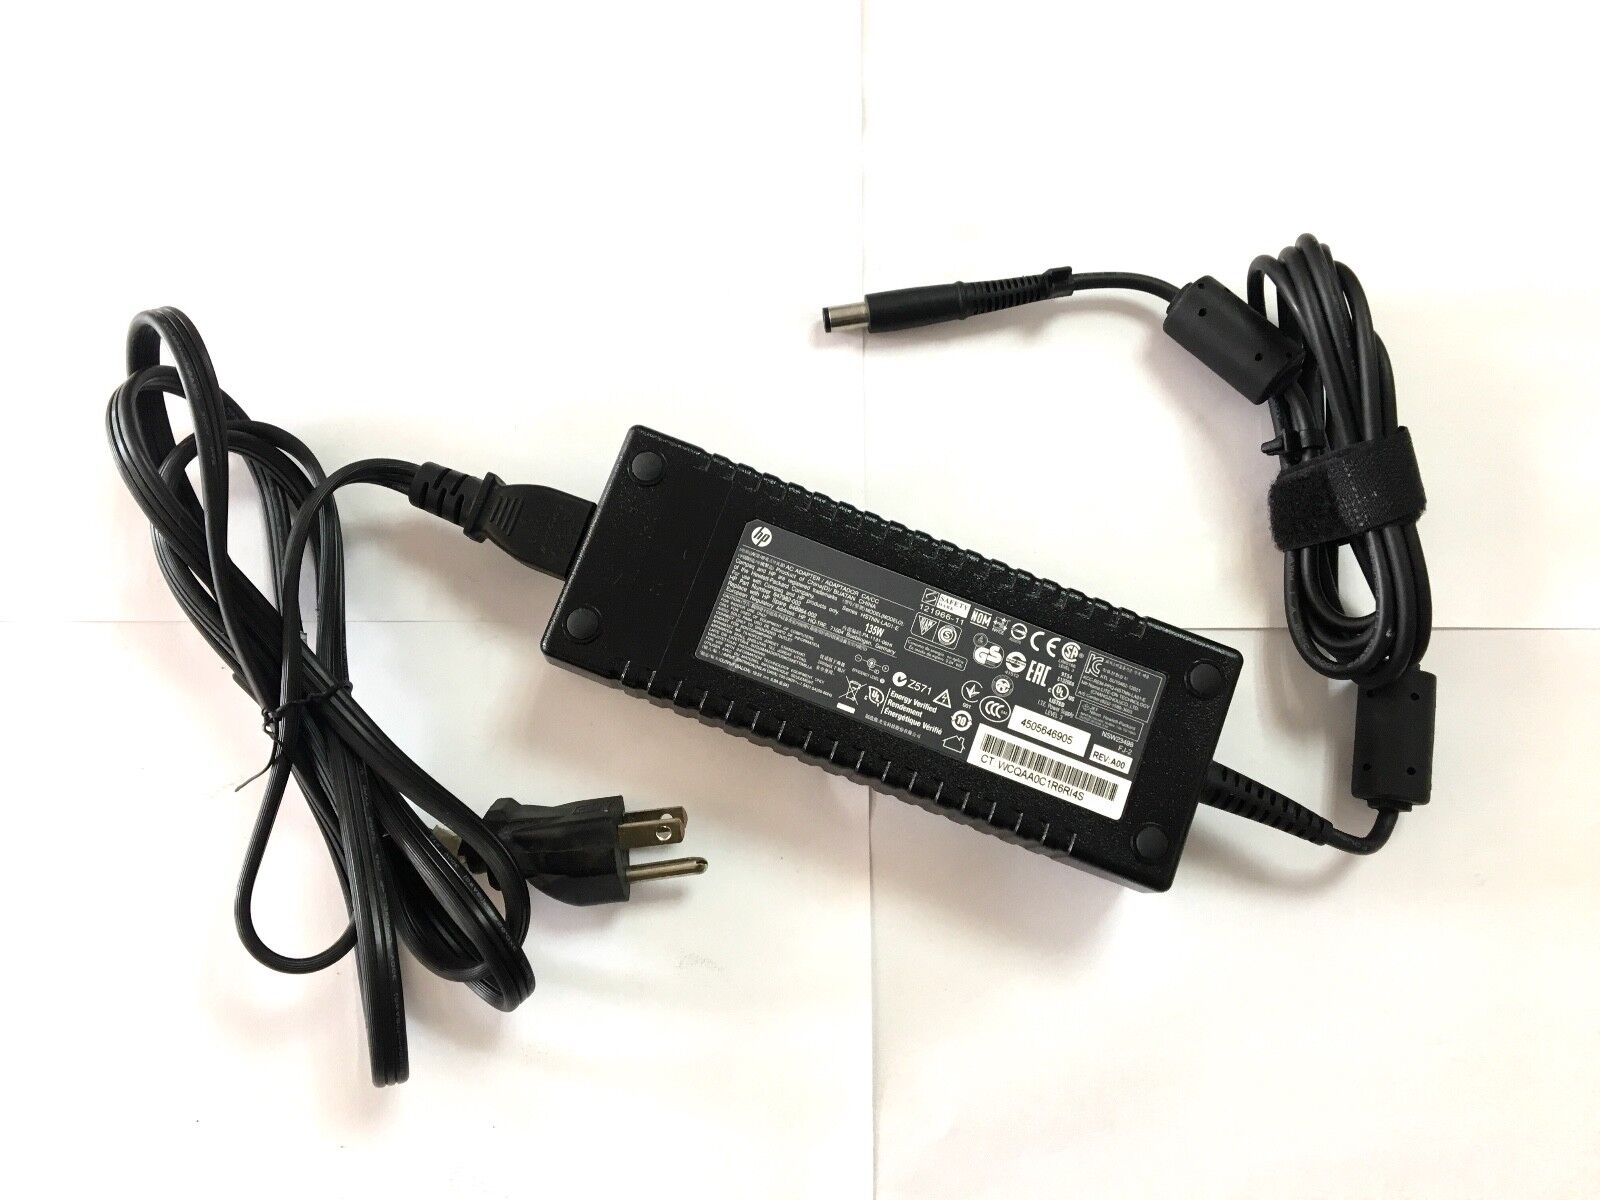 Lot of 100 Genuine HP AC Adapter 135W smart pin for TouchSmart pavilion probook